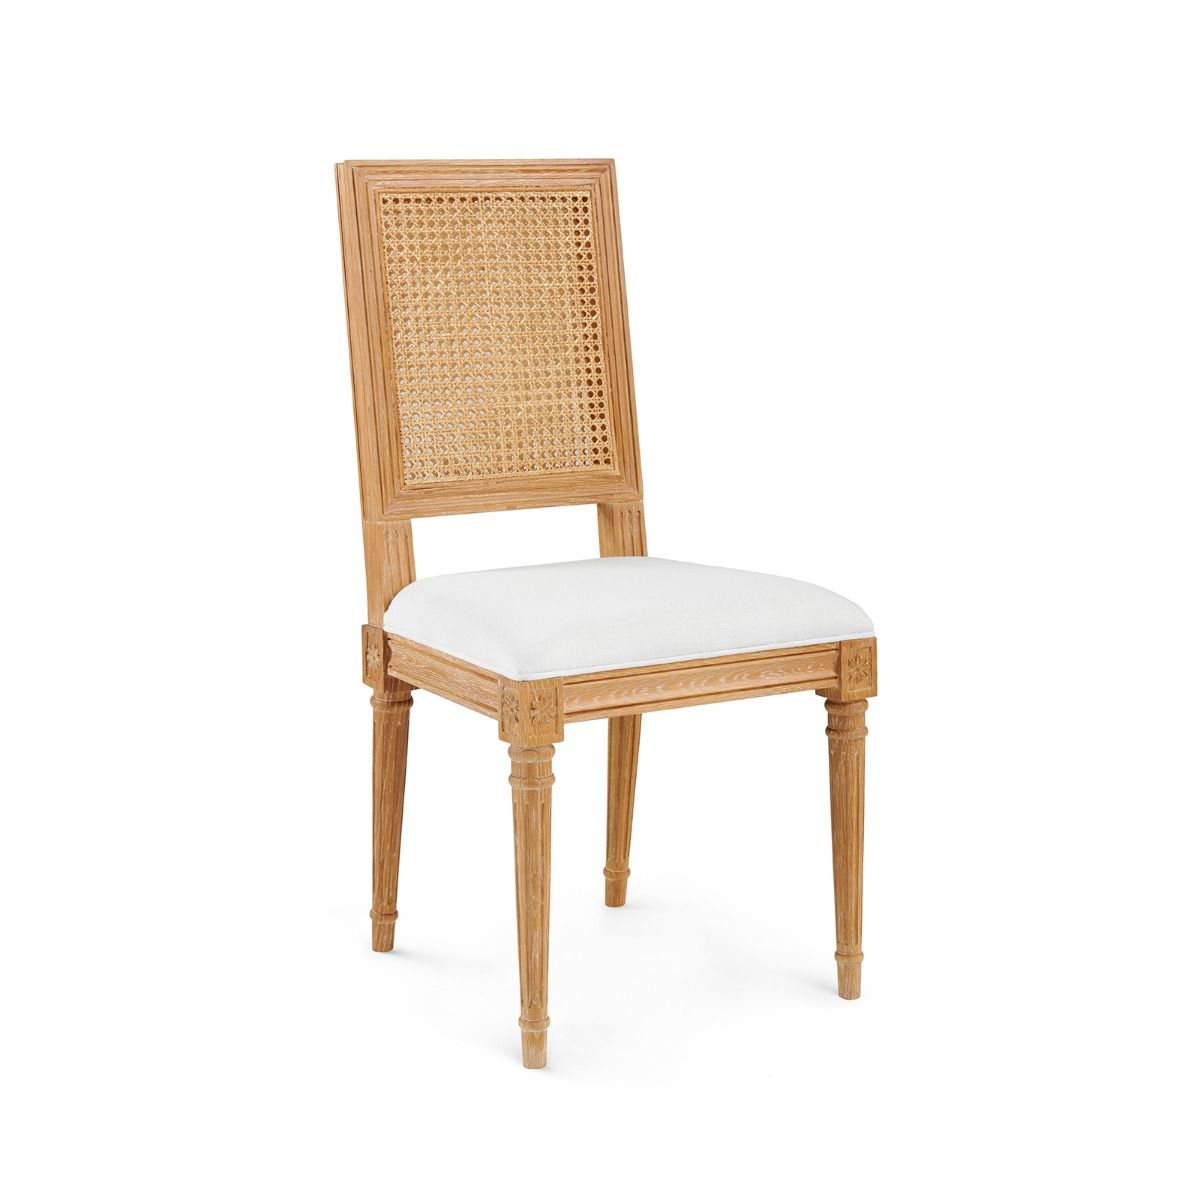 Annette Side Chair NaturalDining Chair Bungalow 5  Natural   Four Hands, Burke Decor, Mid Century Modern Furniture, Old Bones Furniture Company, Old Bones Co, Modern Mid Century, Designer Furniture, https://www.oldbonesco.com/